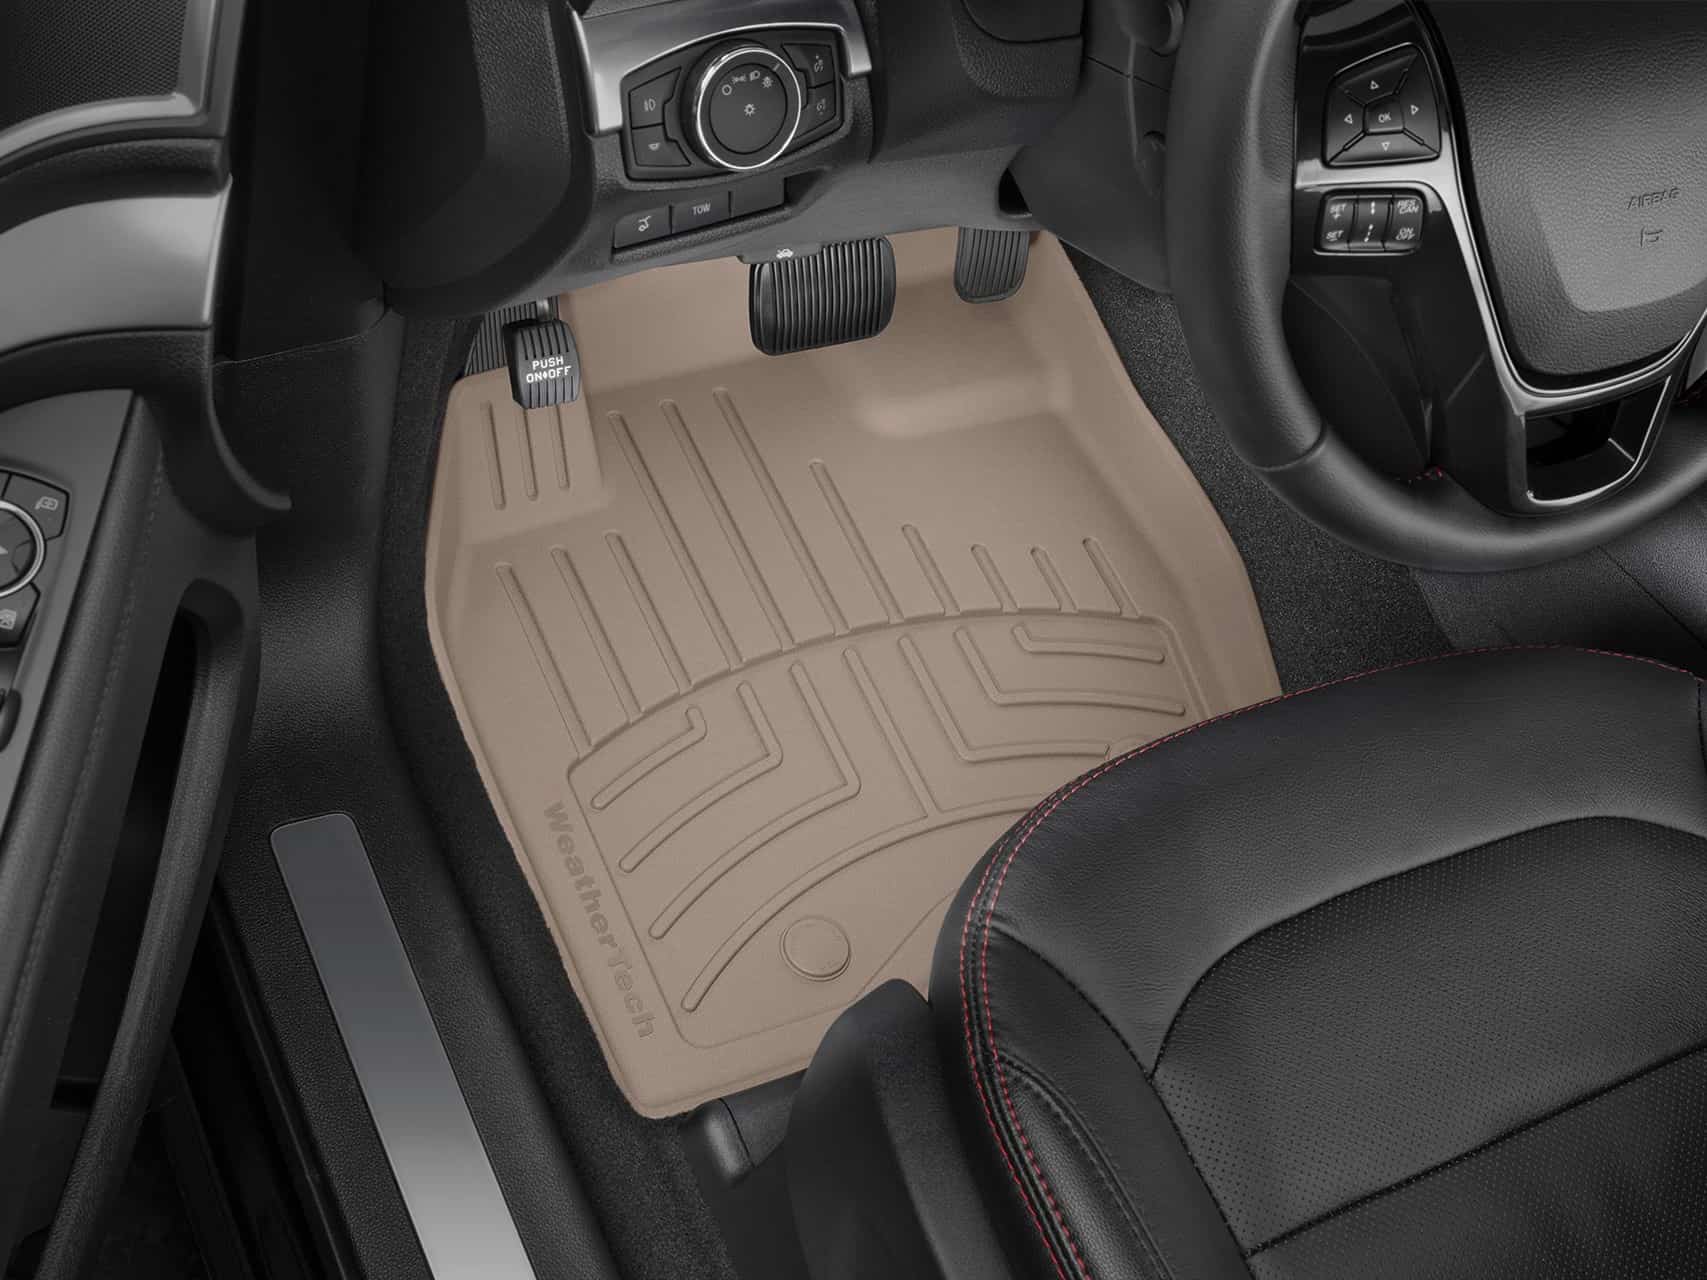 WeatherTech Premium Car Mats are our new improved custom-fit car mat, made from advanced environmentally friendly materials, these are more flexible in design, with improved fitting and floor security.